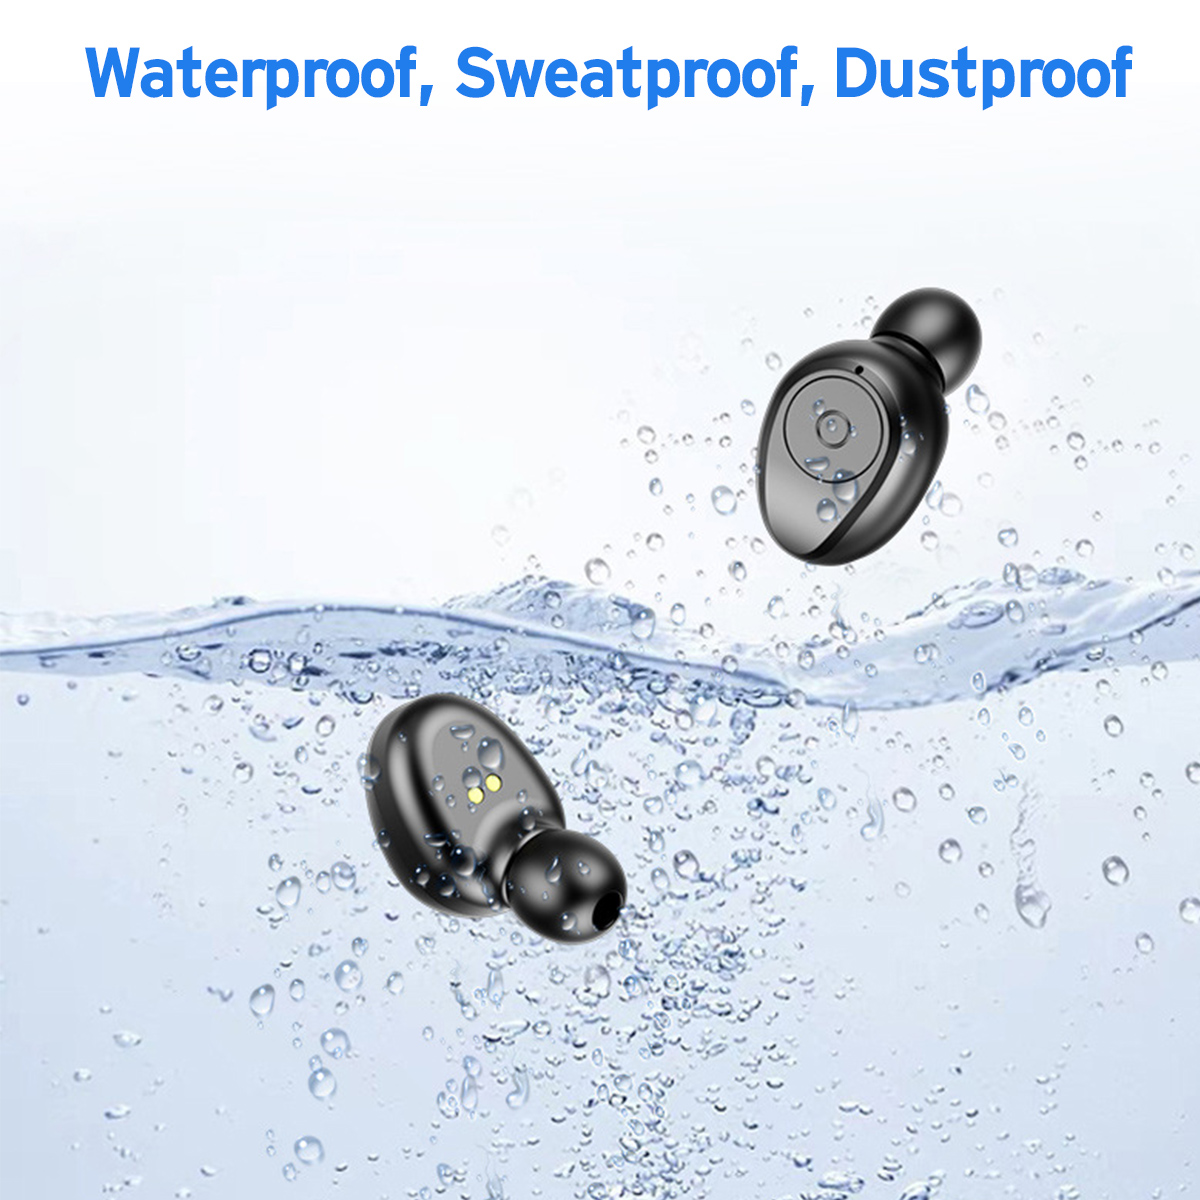 Mini-Wireless-Stereo-bluetooth-50-Earbuds-IPX7-Waterproof-Touch-Earphone-Noise-Reduction-Handsfree-H-1519860-4